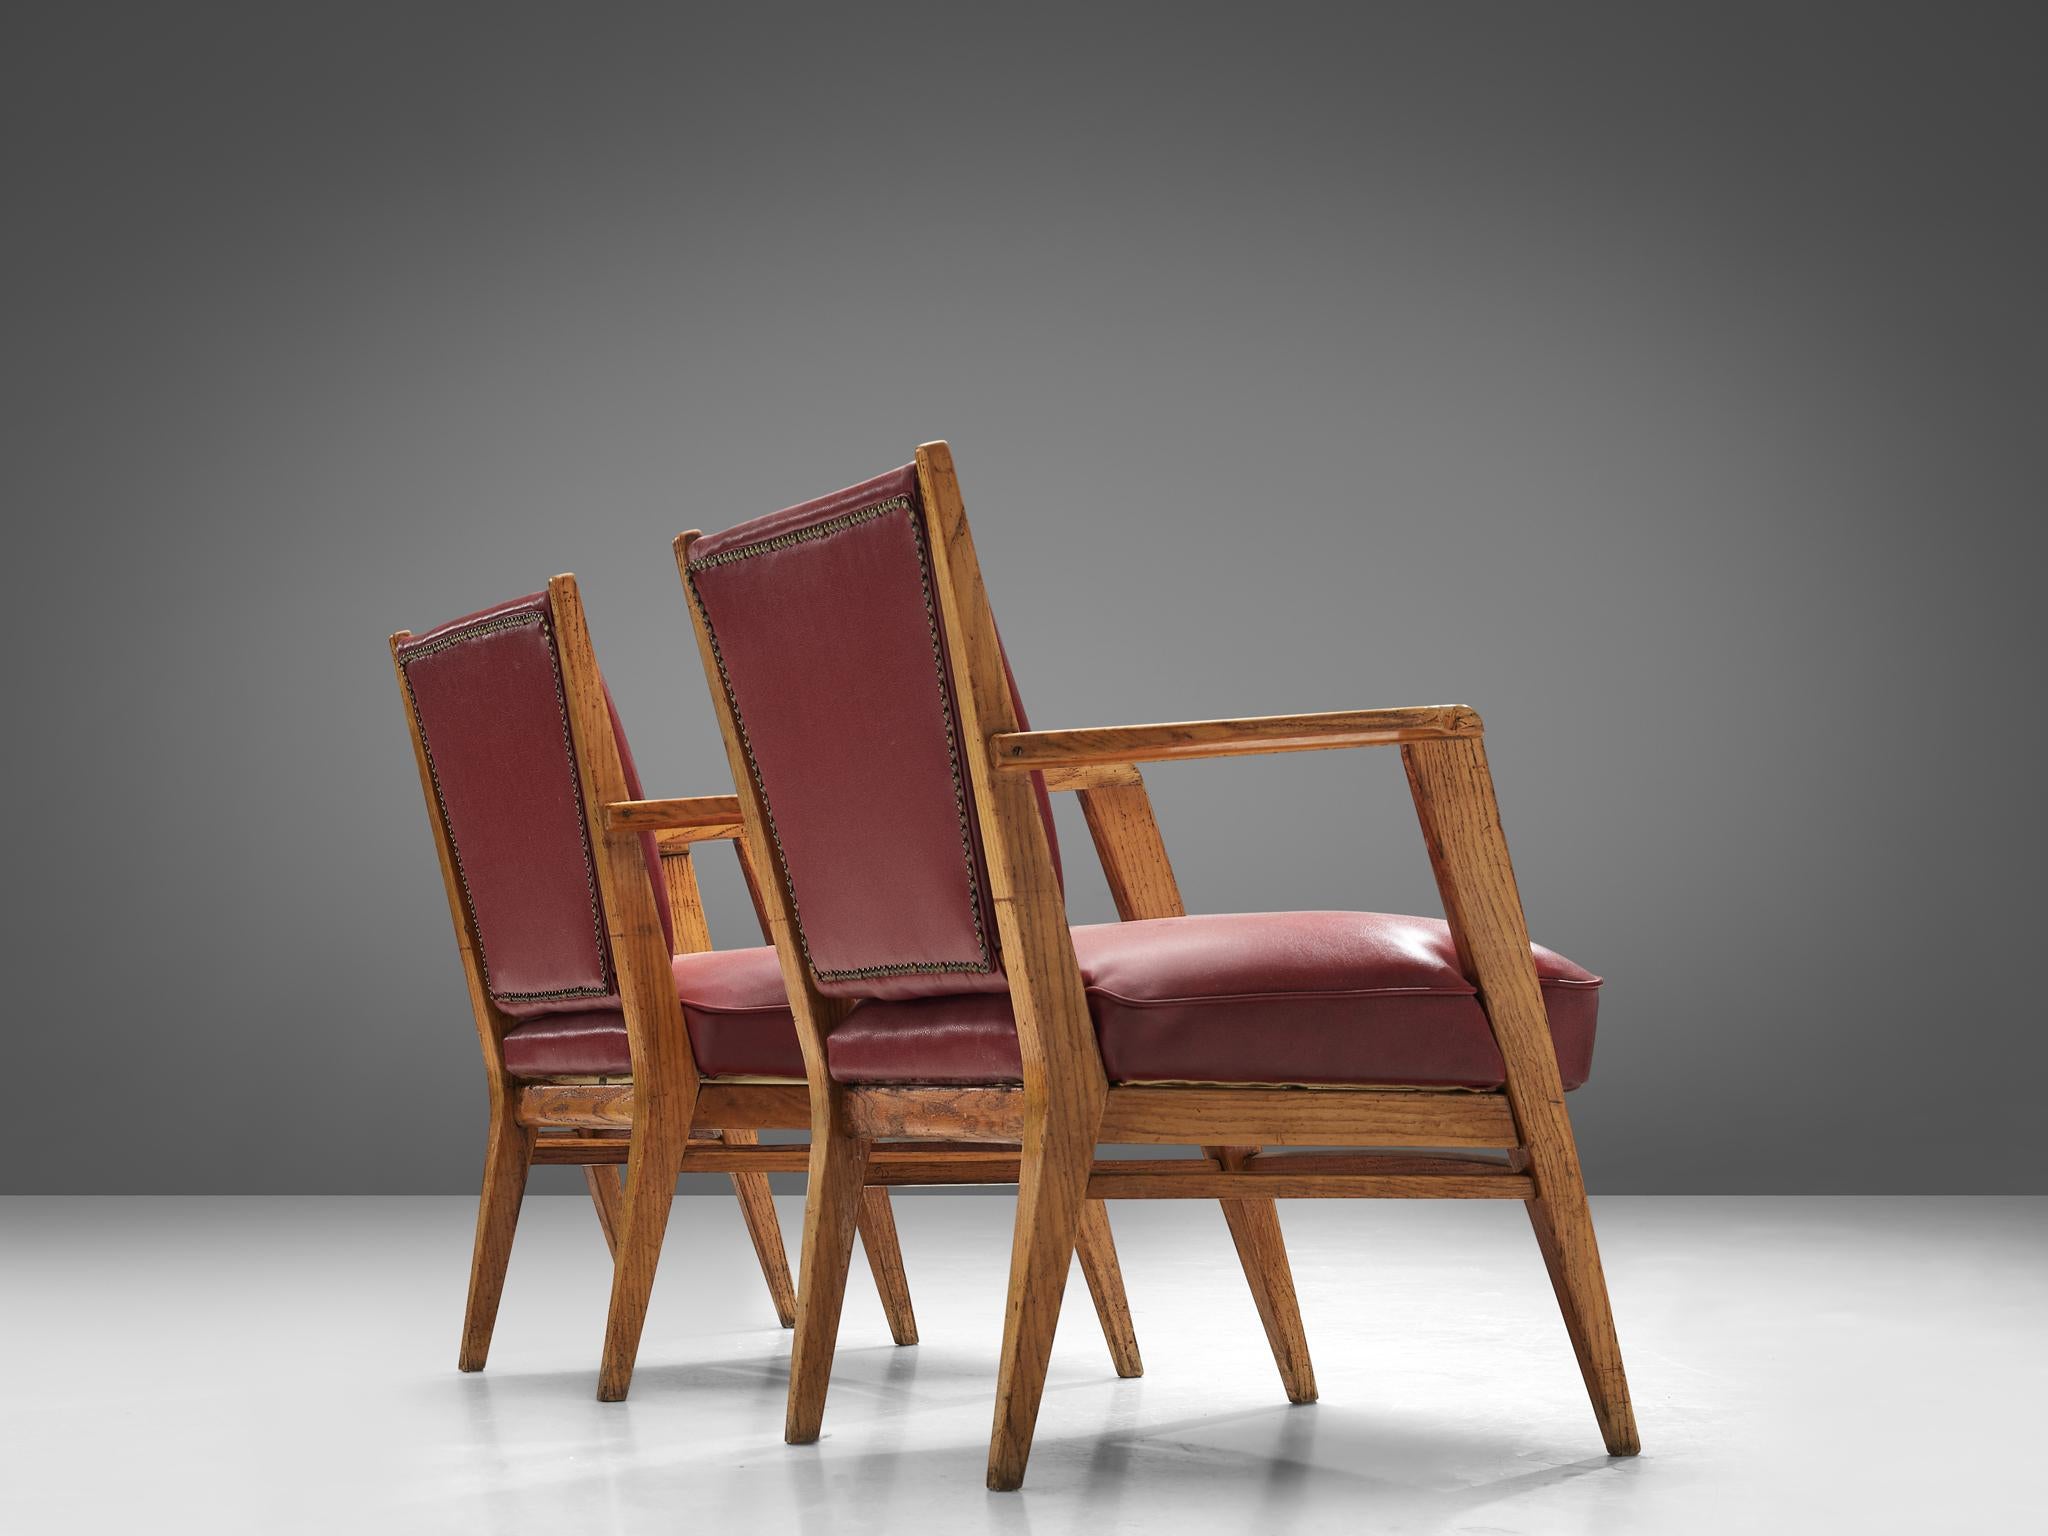 BBPR, pair of armchairs, leatherette, oak, Italy, 1950s

This sculptural pair of lounge chairs are clearly a design by the architects of BBPR. The model with a wide seat has the characteristic, sculptural frame. The tapered and tilted legs with